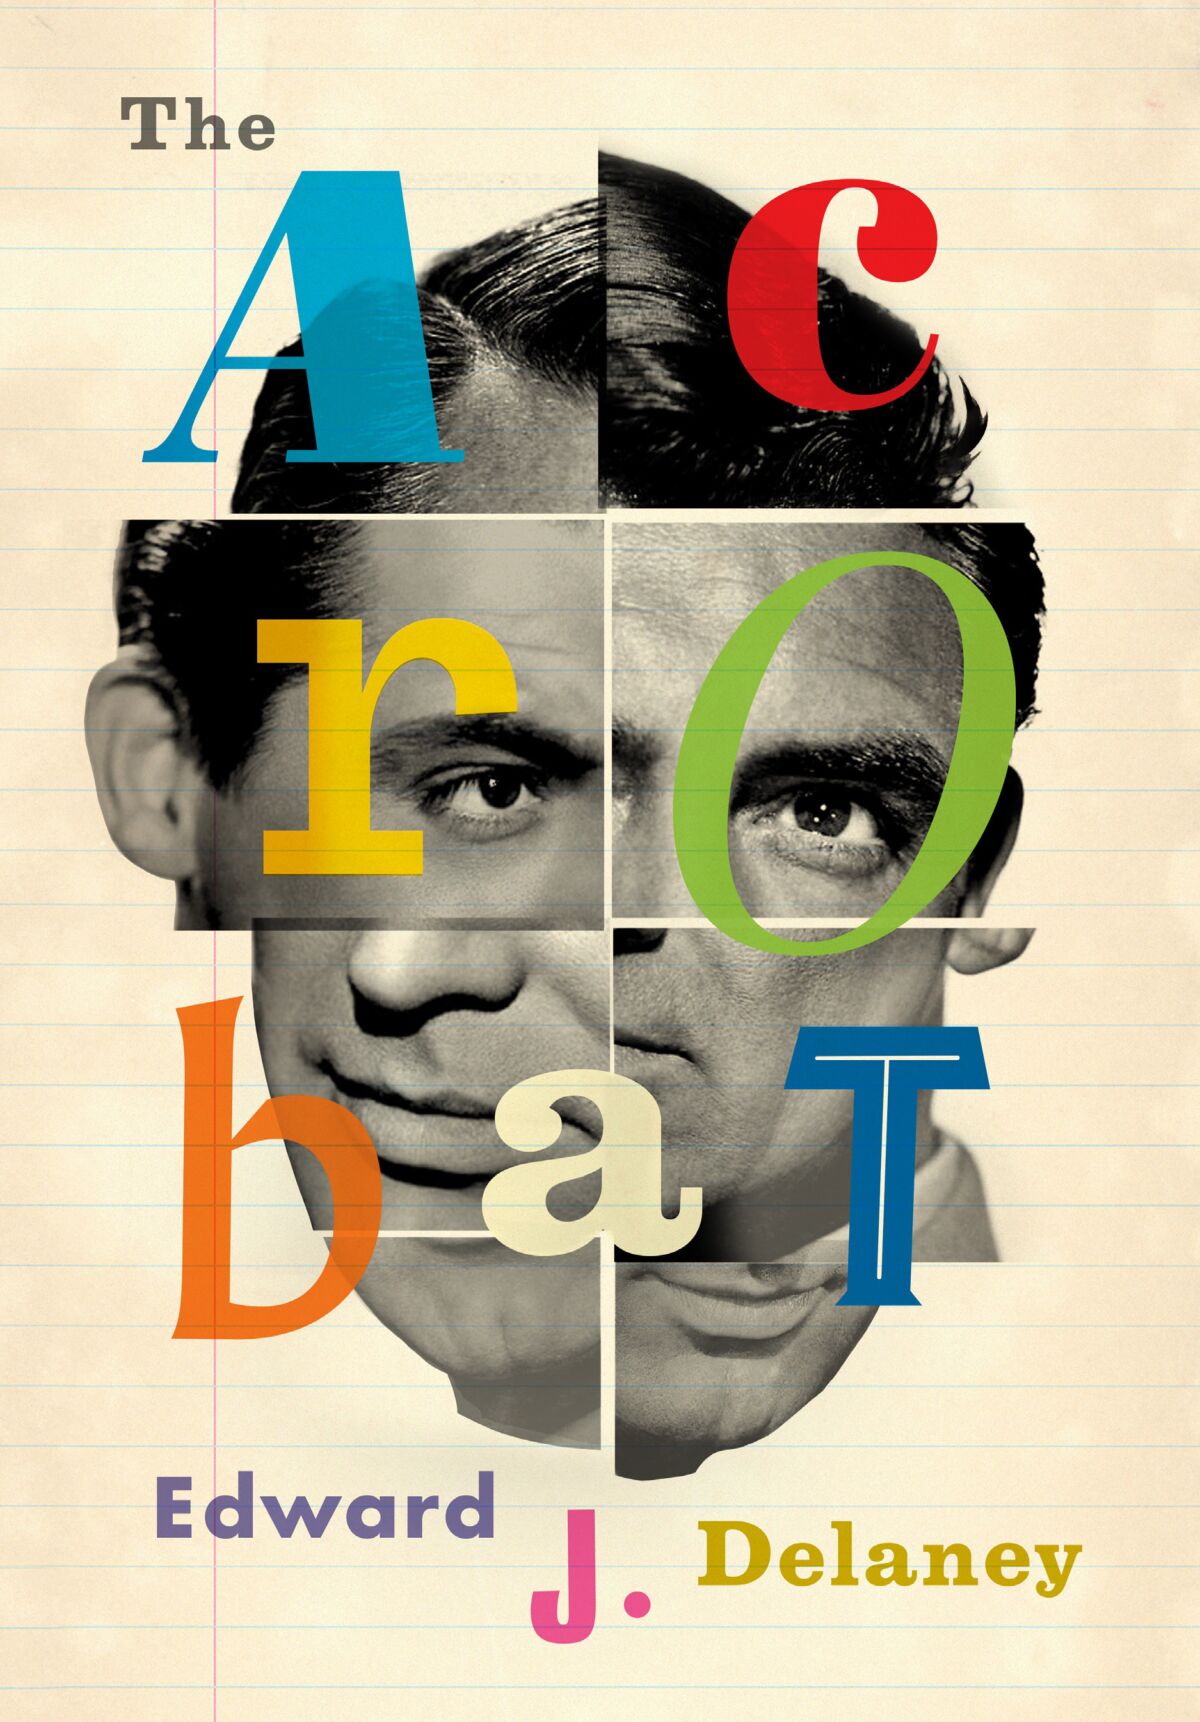 "The Acrobat" book cover features a fragmented portrait of Cary Grant.